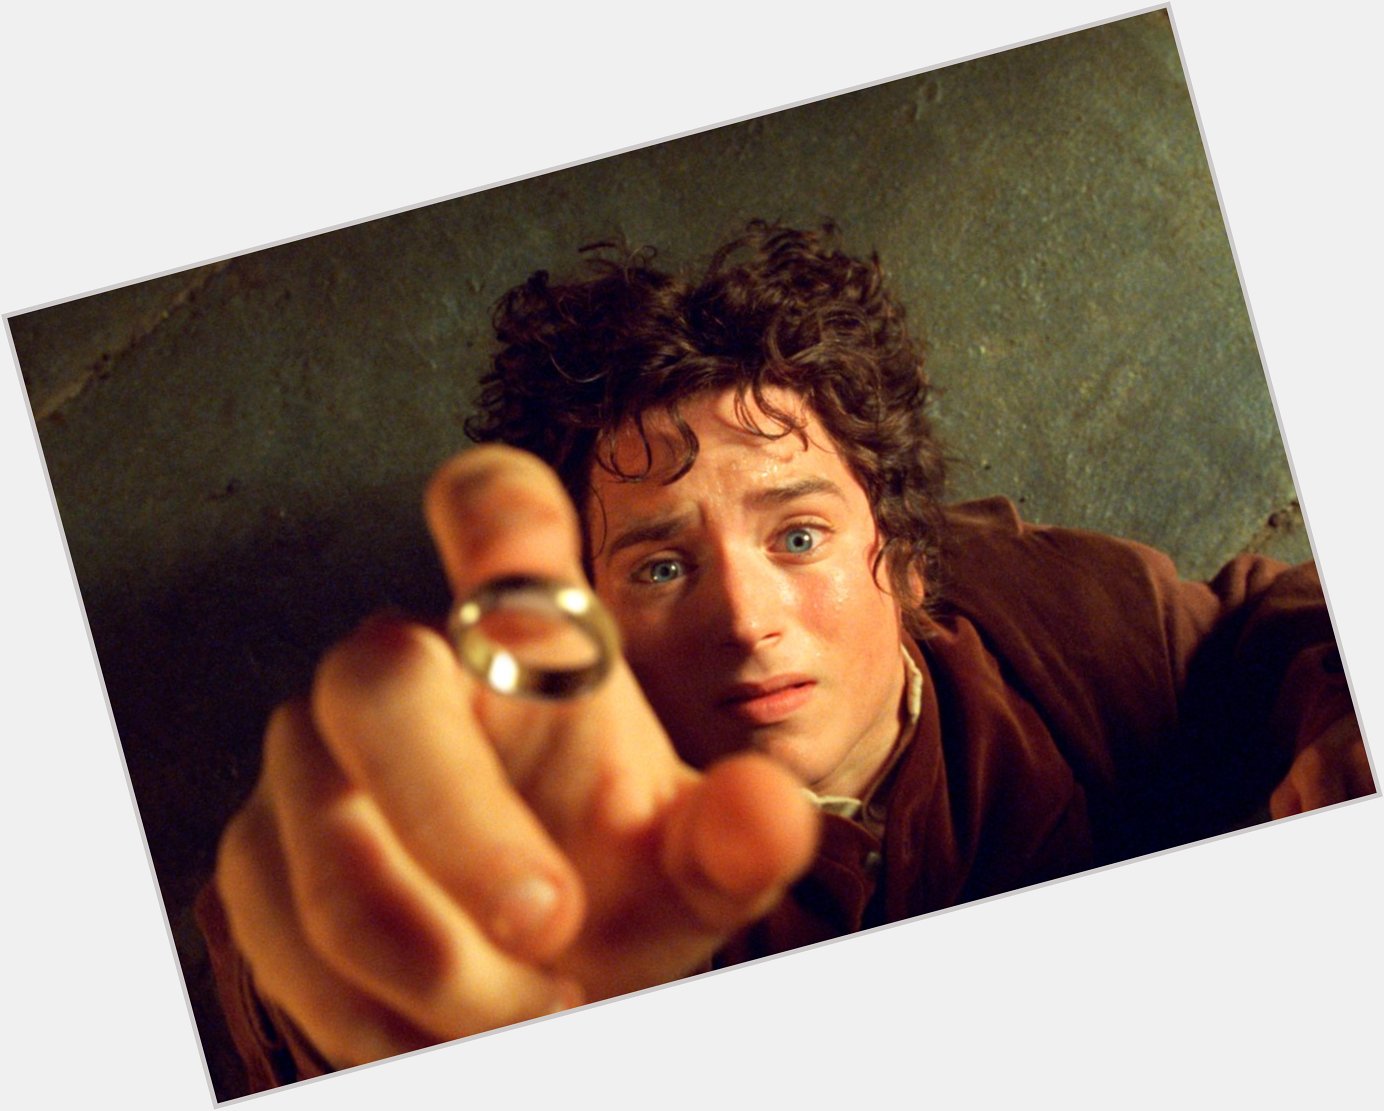 A birthday is never late or early. It arrives precisely when it means to. Happy birthday, Elijah Wood! 